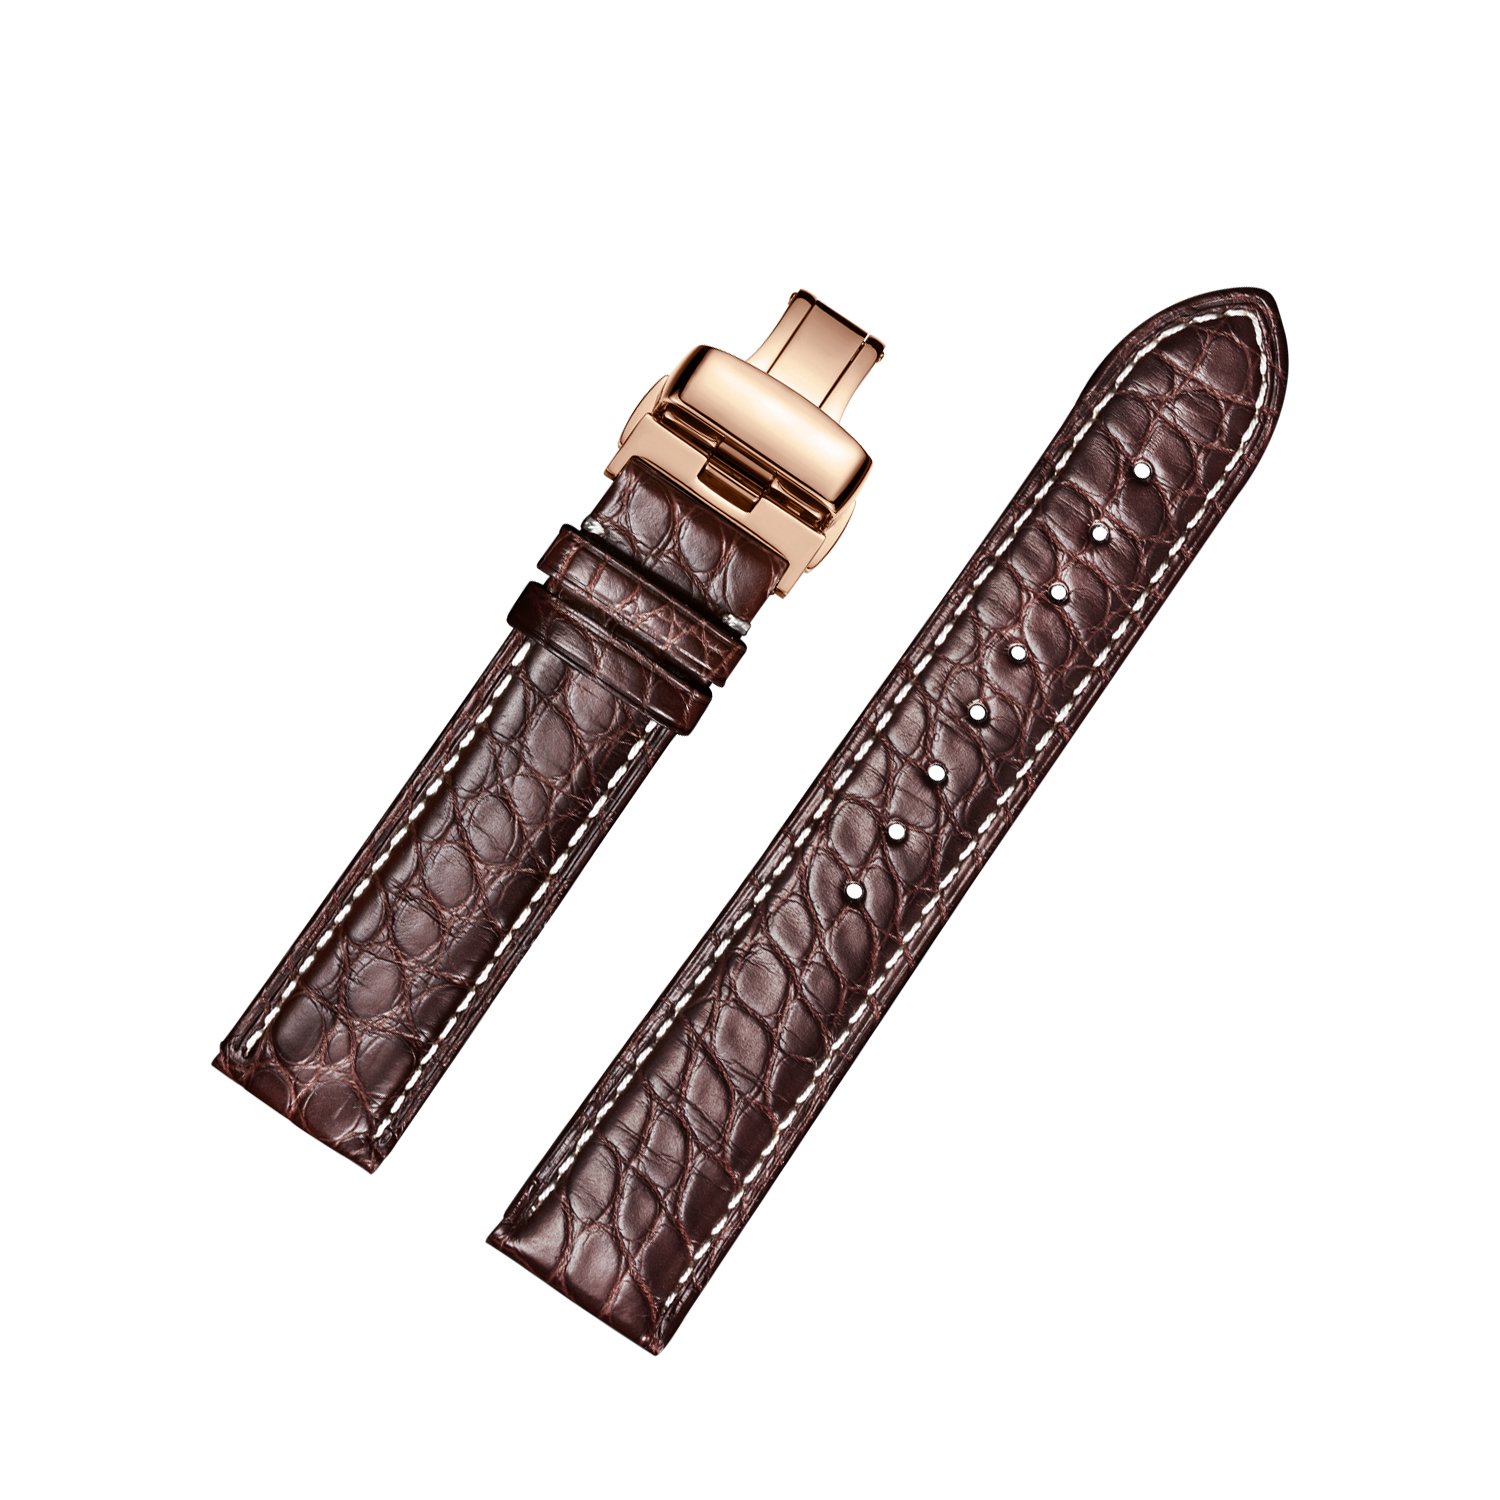 Alligator Leather Watch Strap Deployment Buckle for Men Watch's Band and Women's Watch Band 18mm 19mm 20mm 21mm 22mm 23mm 24mm